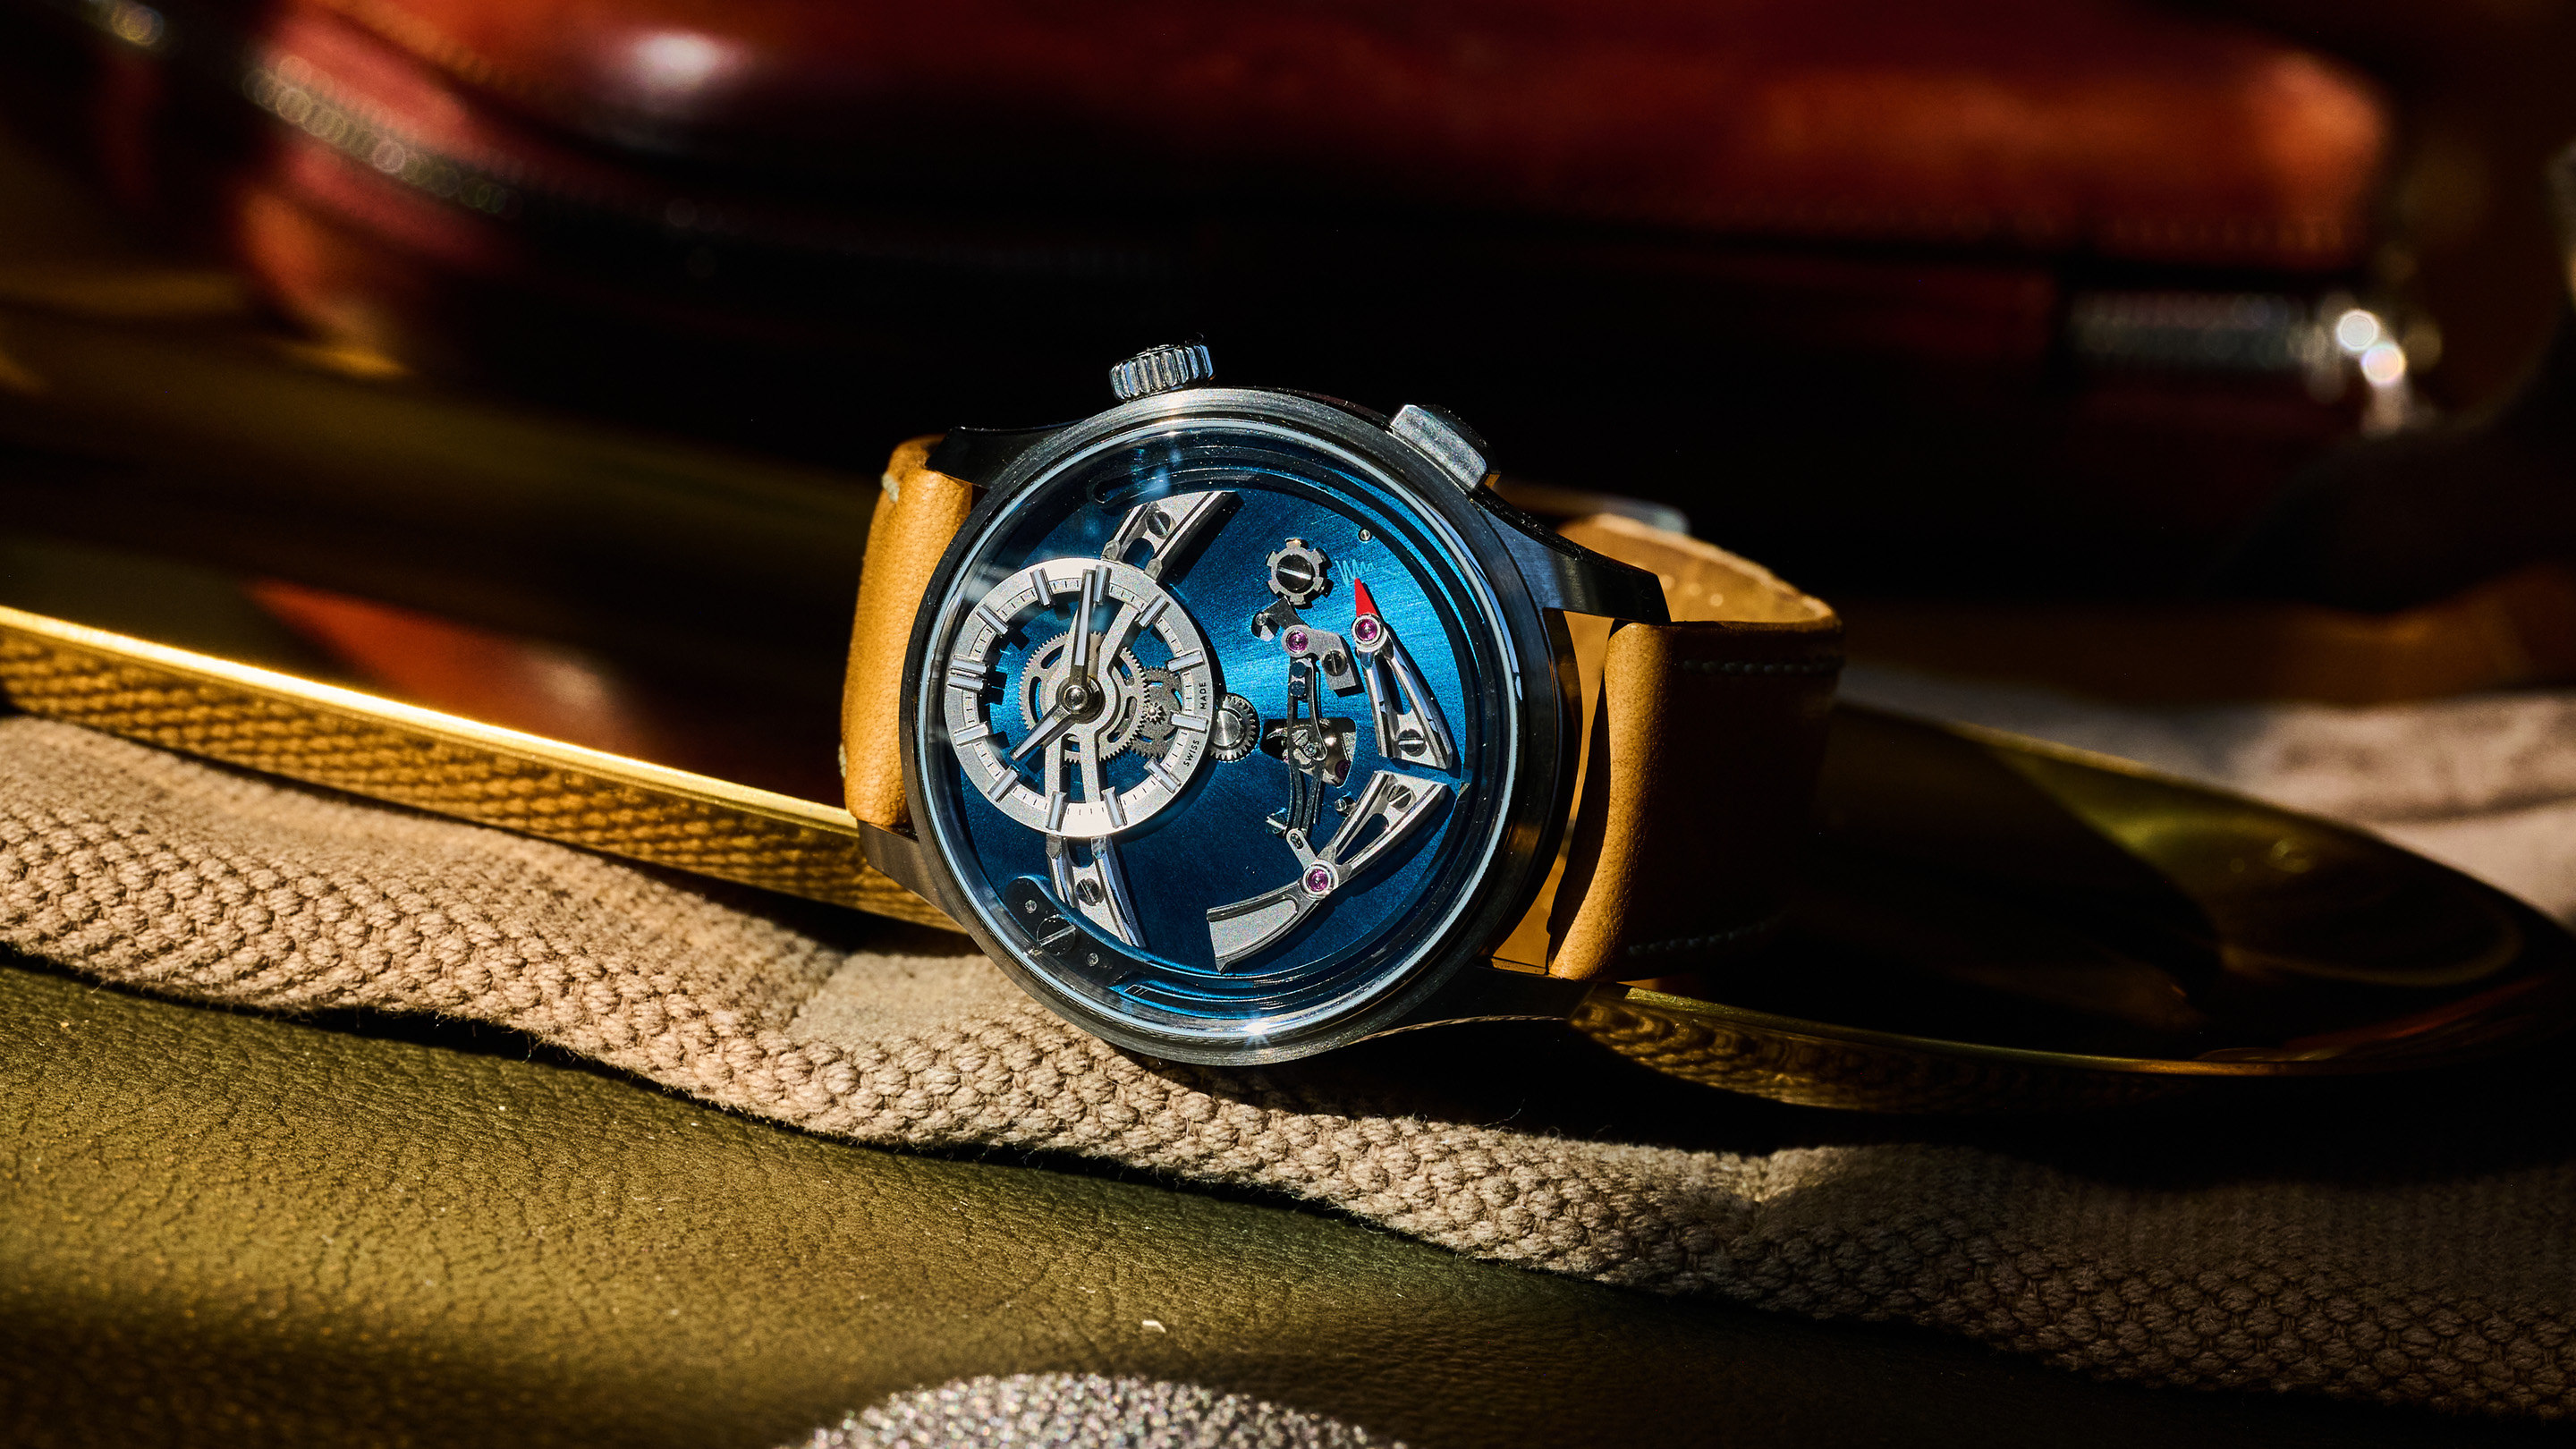 Minute repeaters: technical prowess chimes with collectors